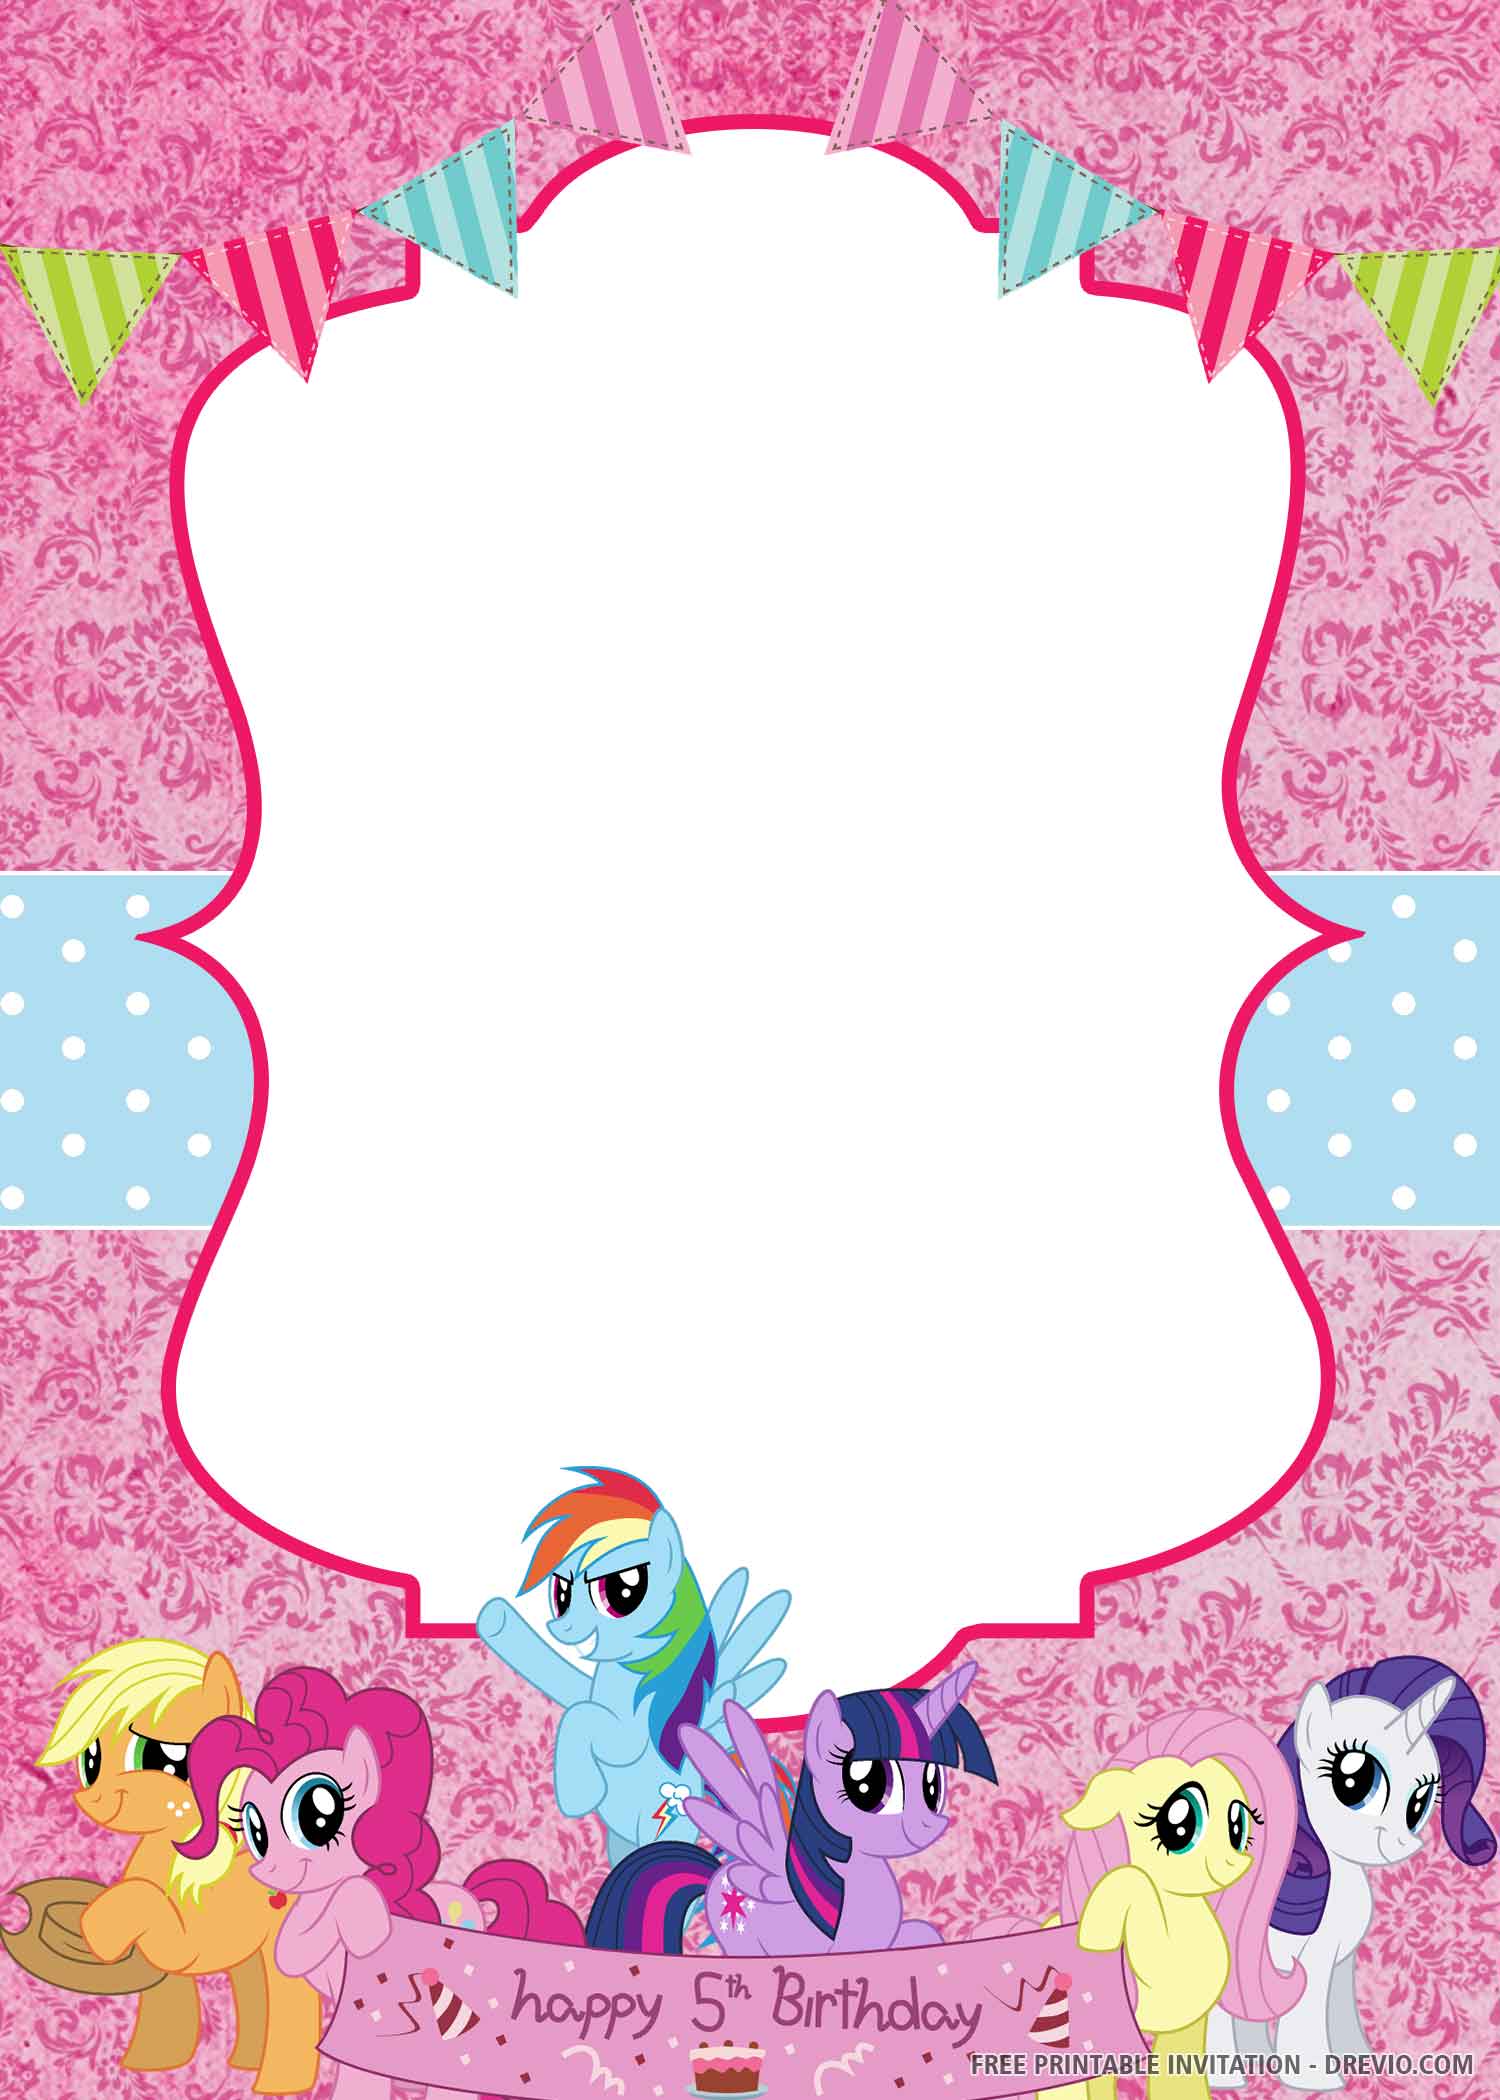 You Print! Custom My Little Pony Party Invitation Personalized 